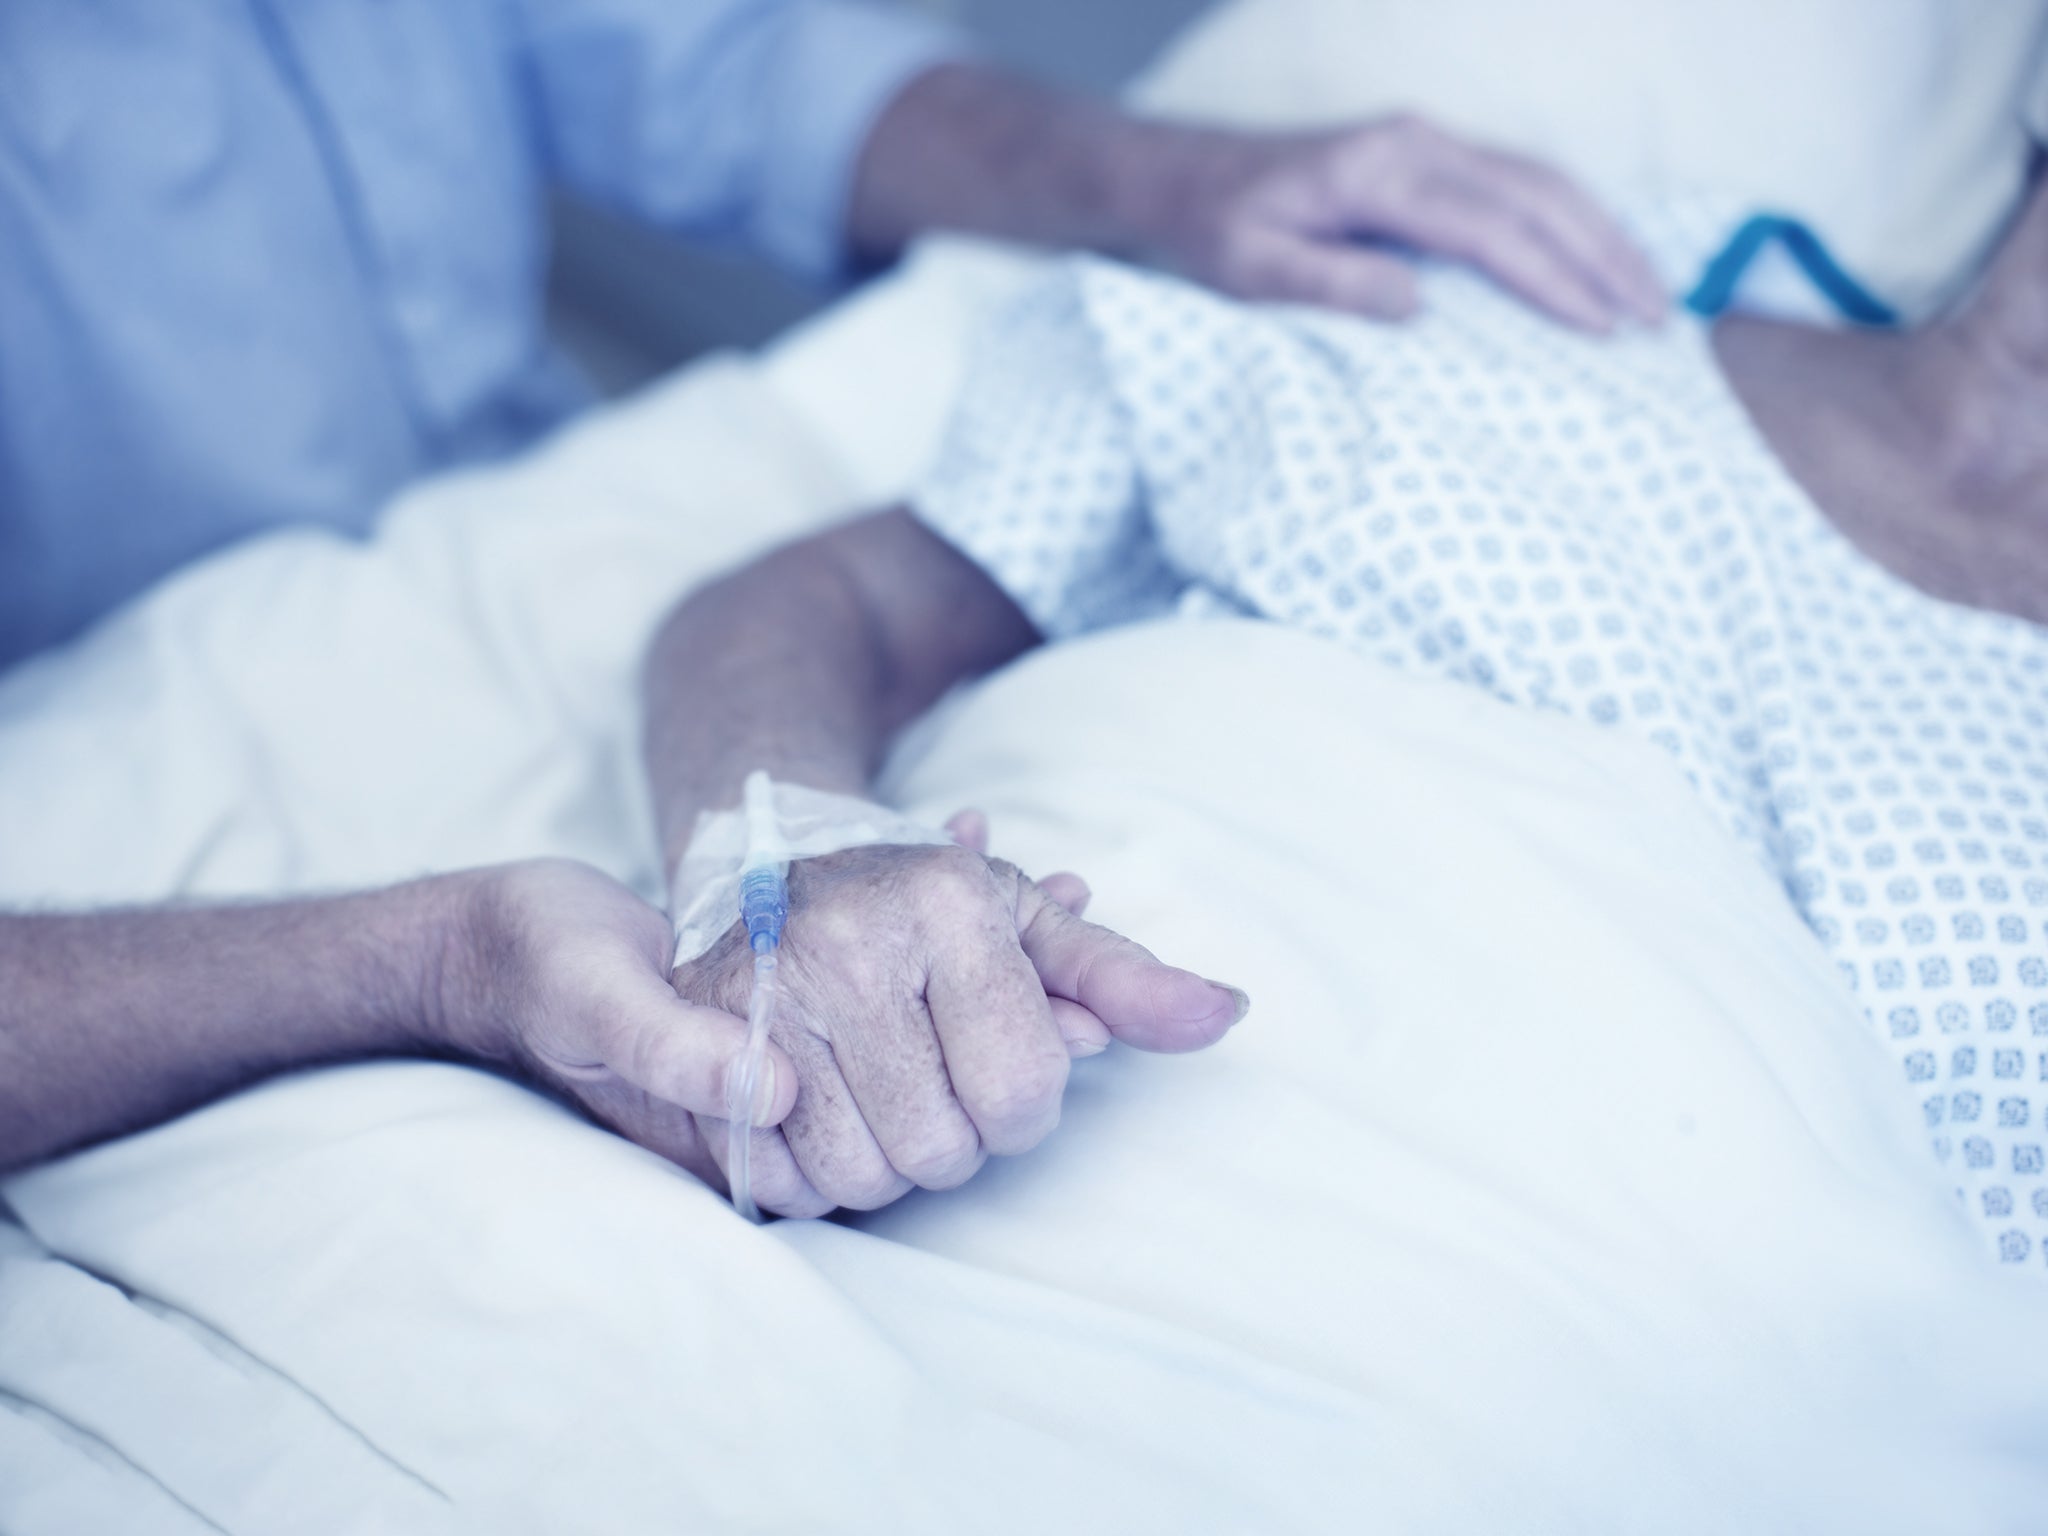 Assisted dying is a question not just of morality but one of politics